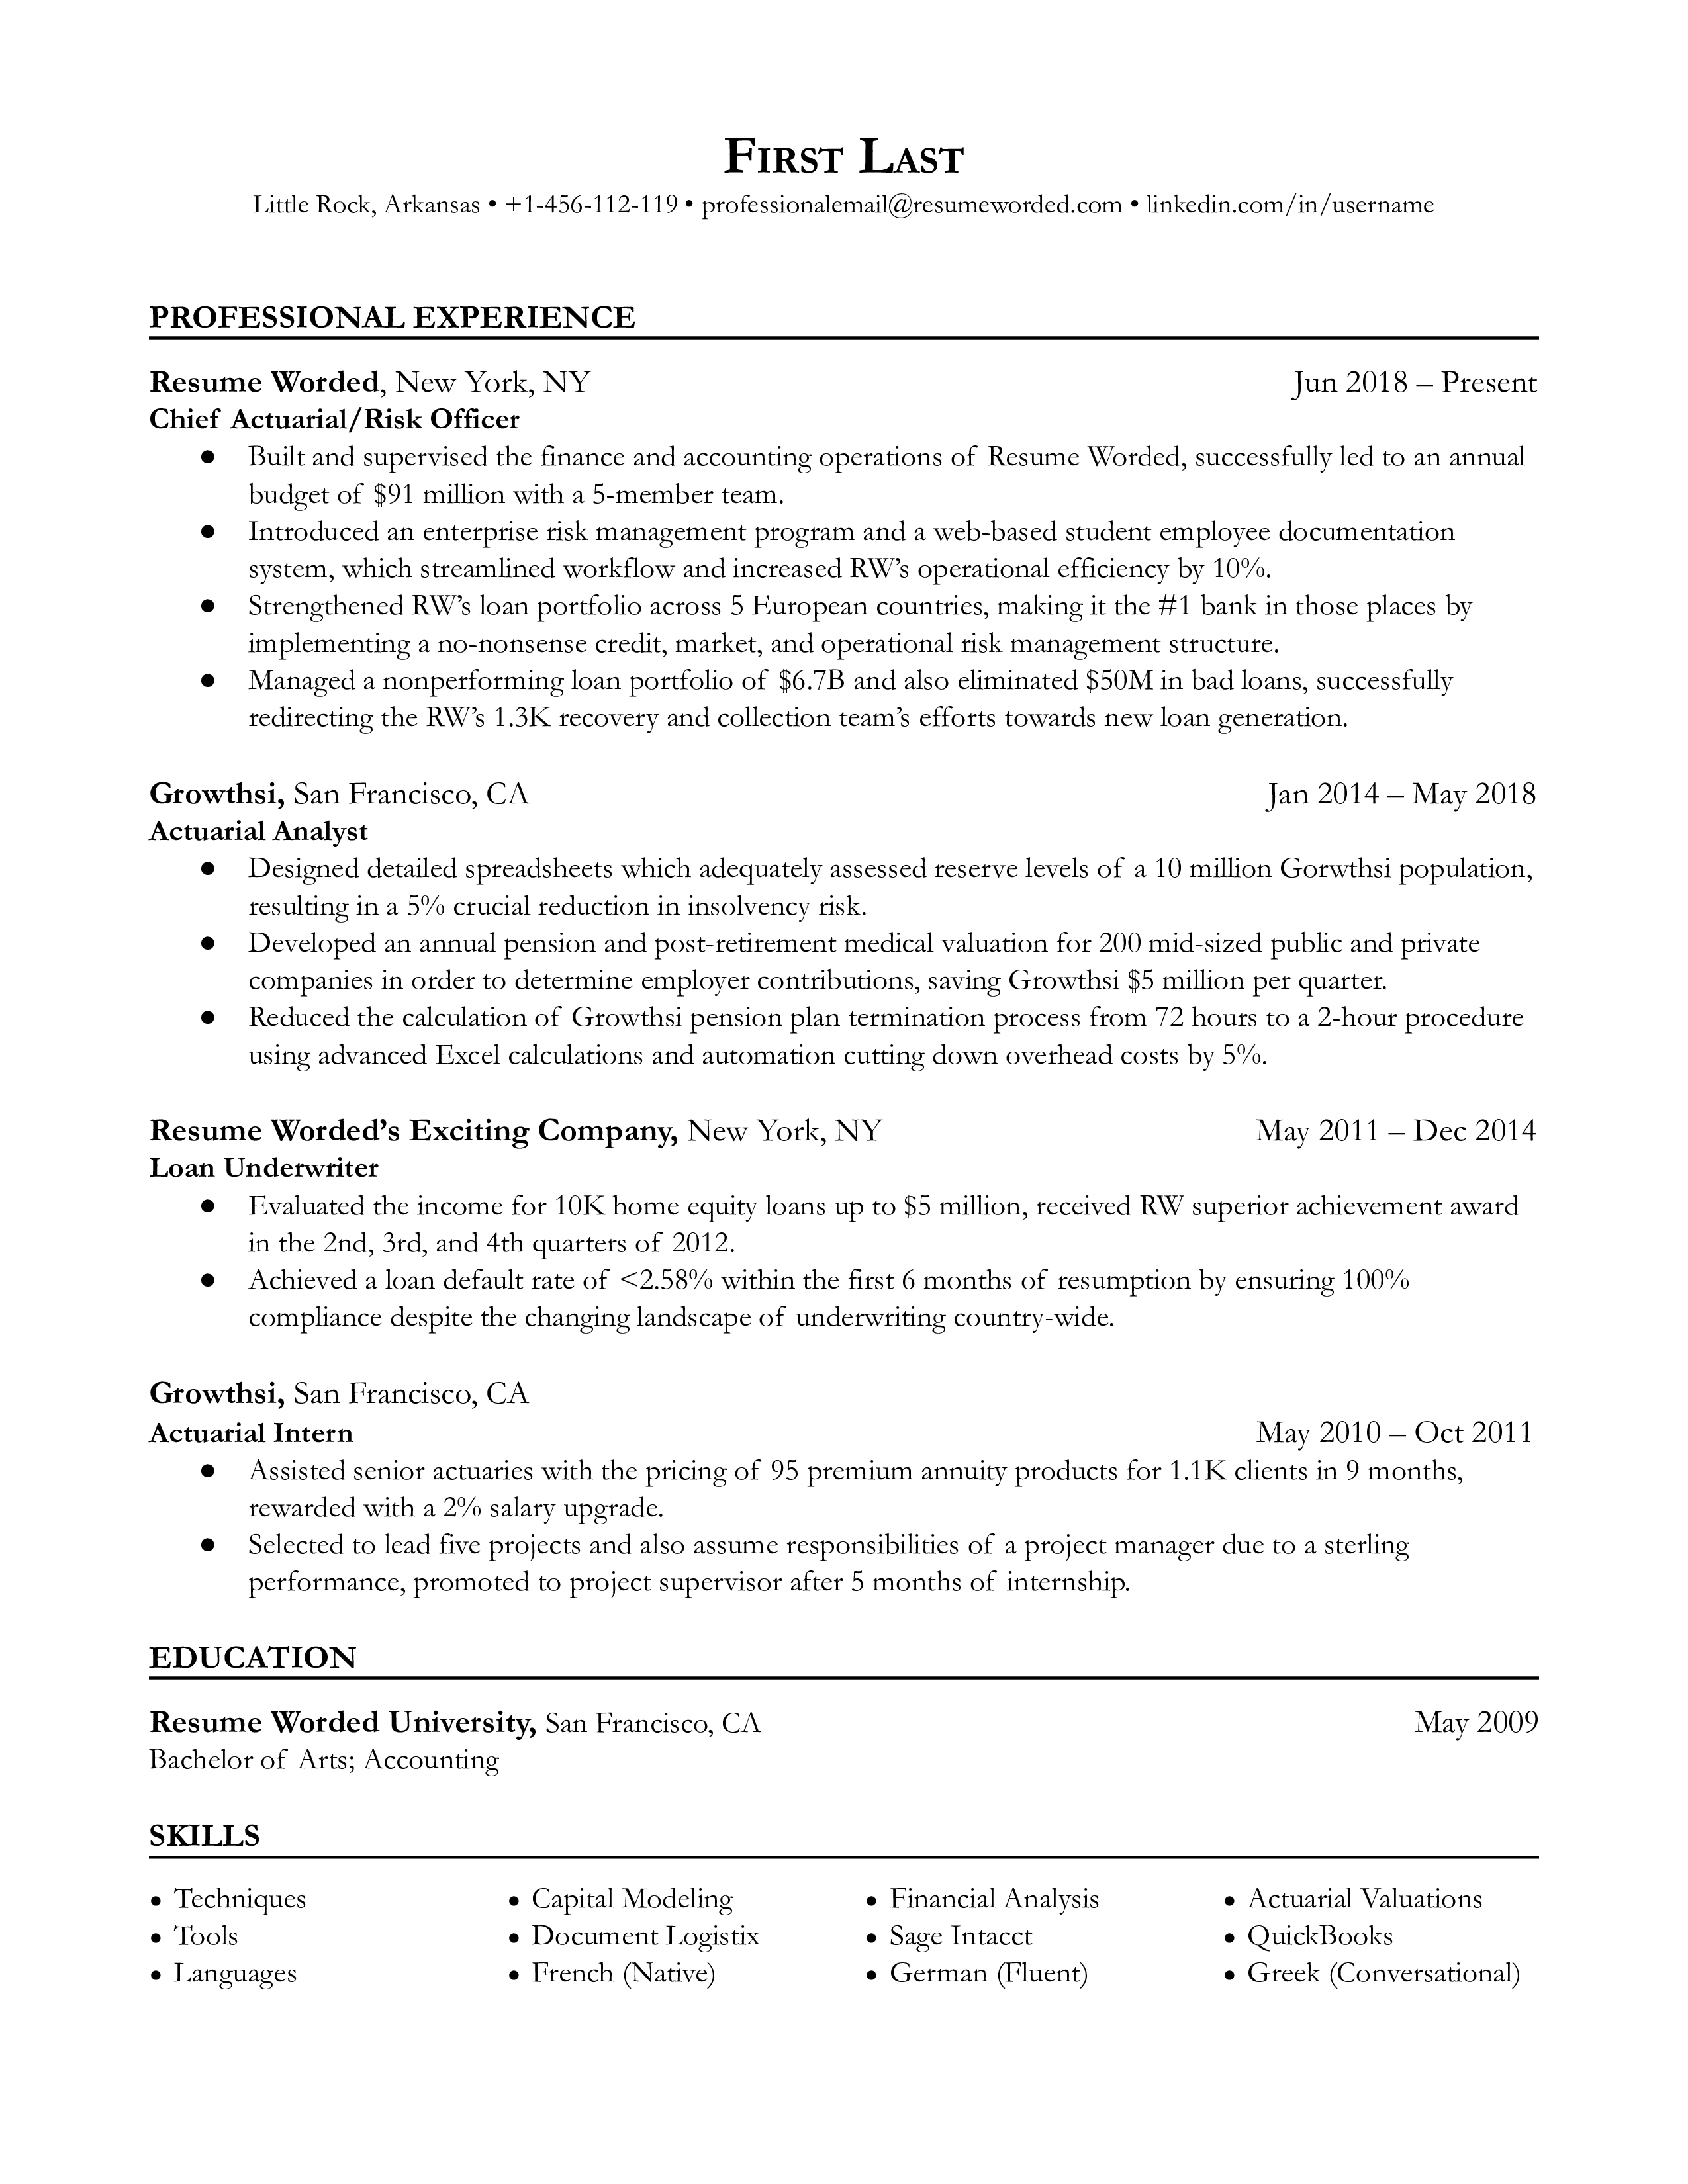 Professional CV of Chief Actuarial/Risk Officer showcasing strategic leadership and tech-savviness.